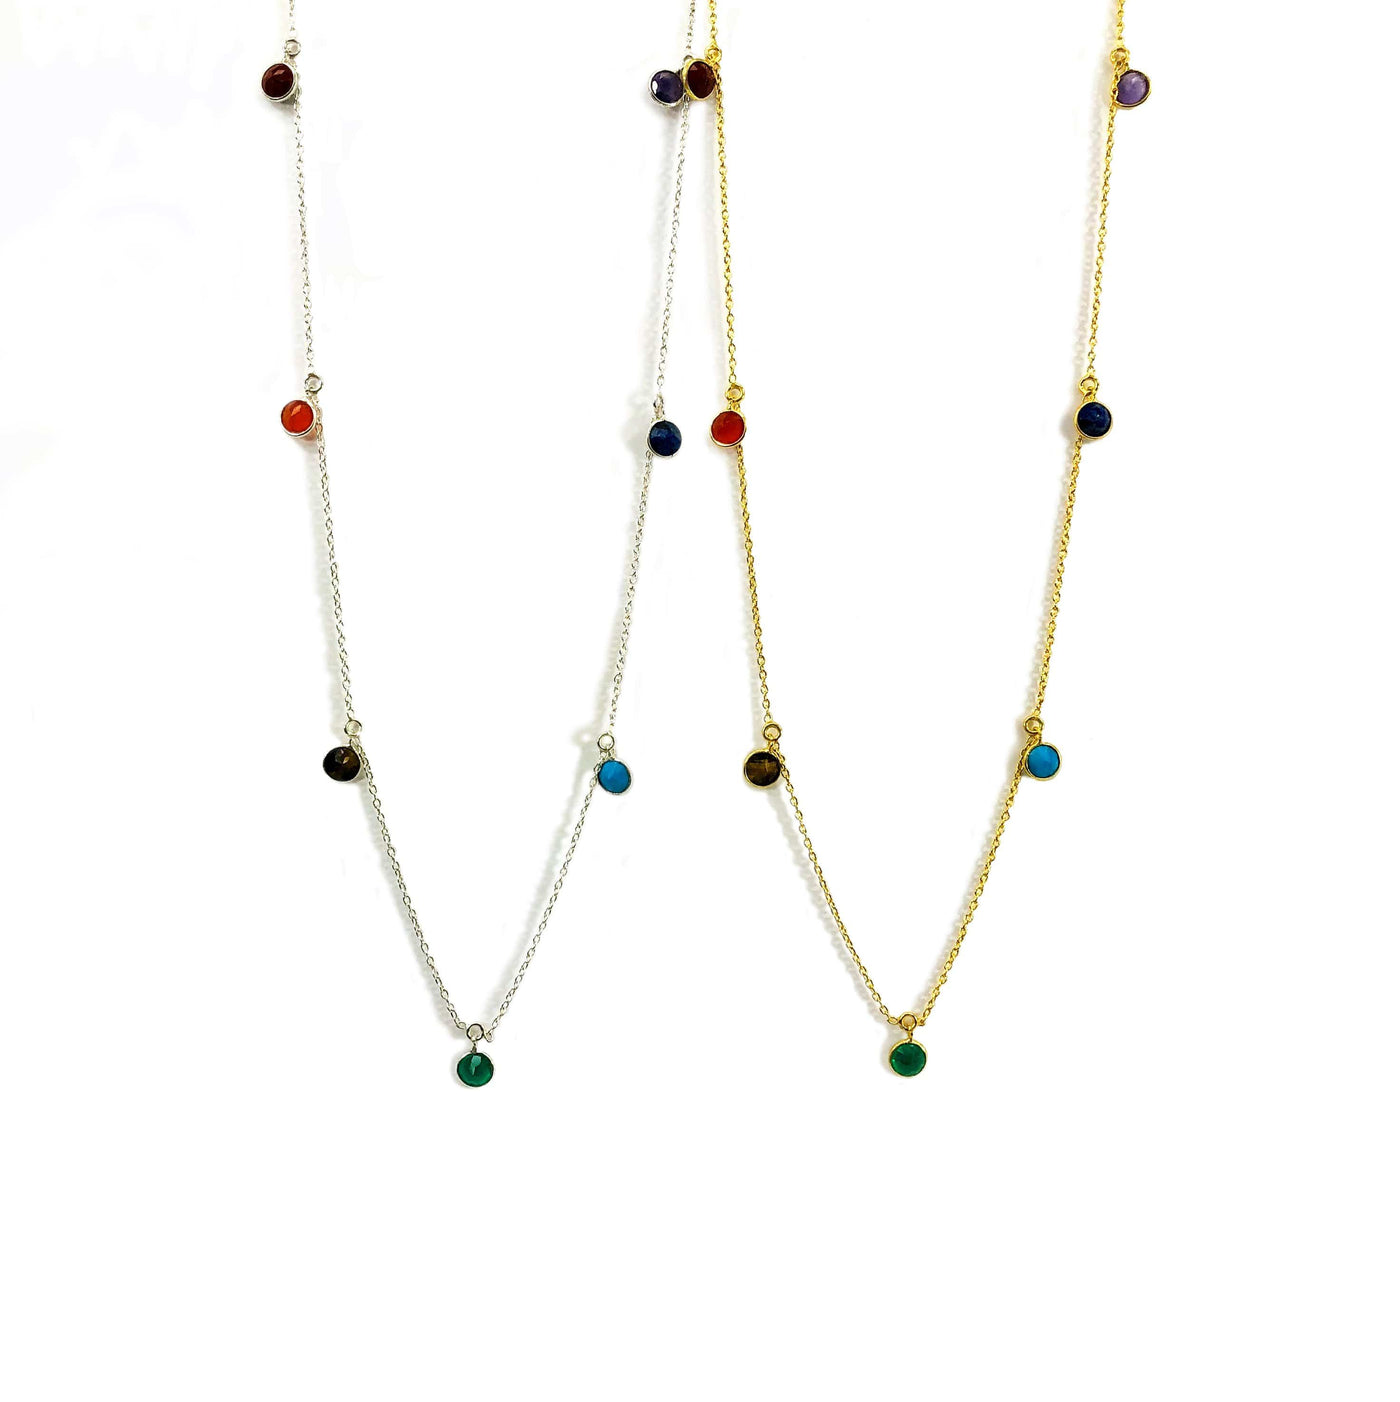 silver and gold seven chakra dangle necklace on white background 